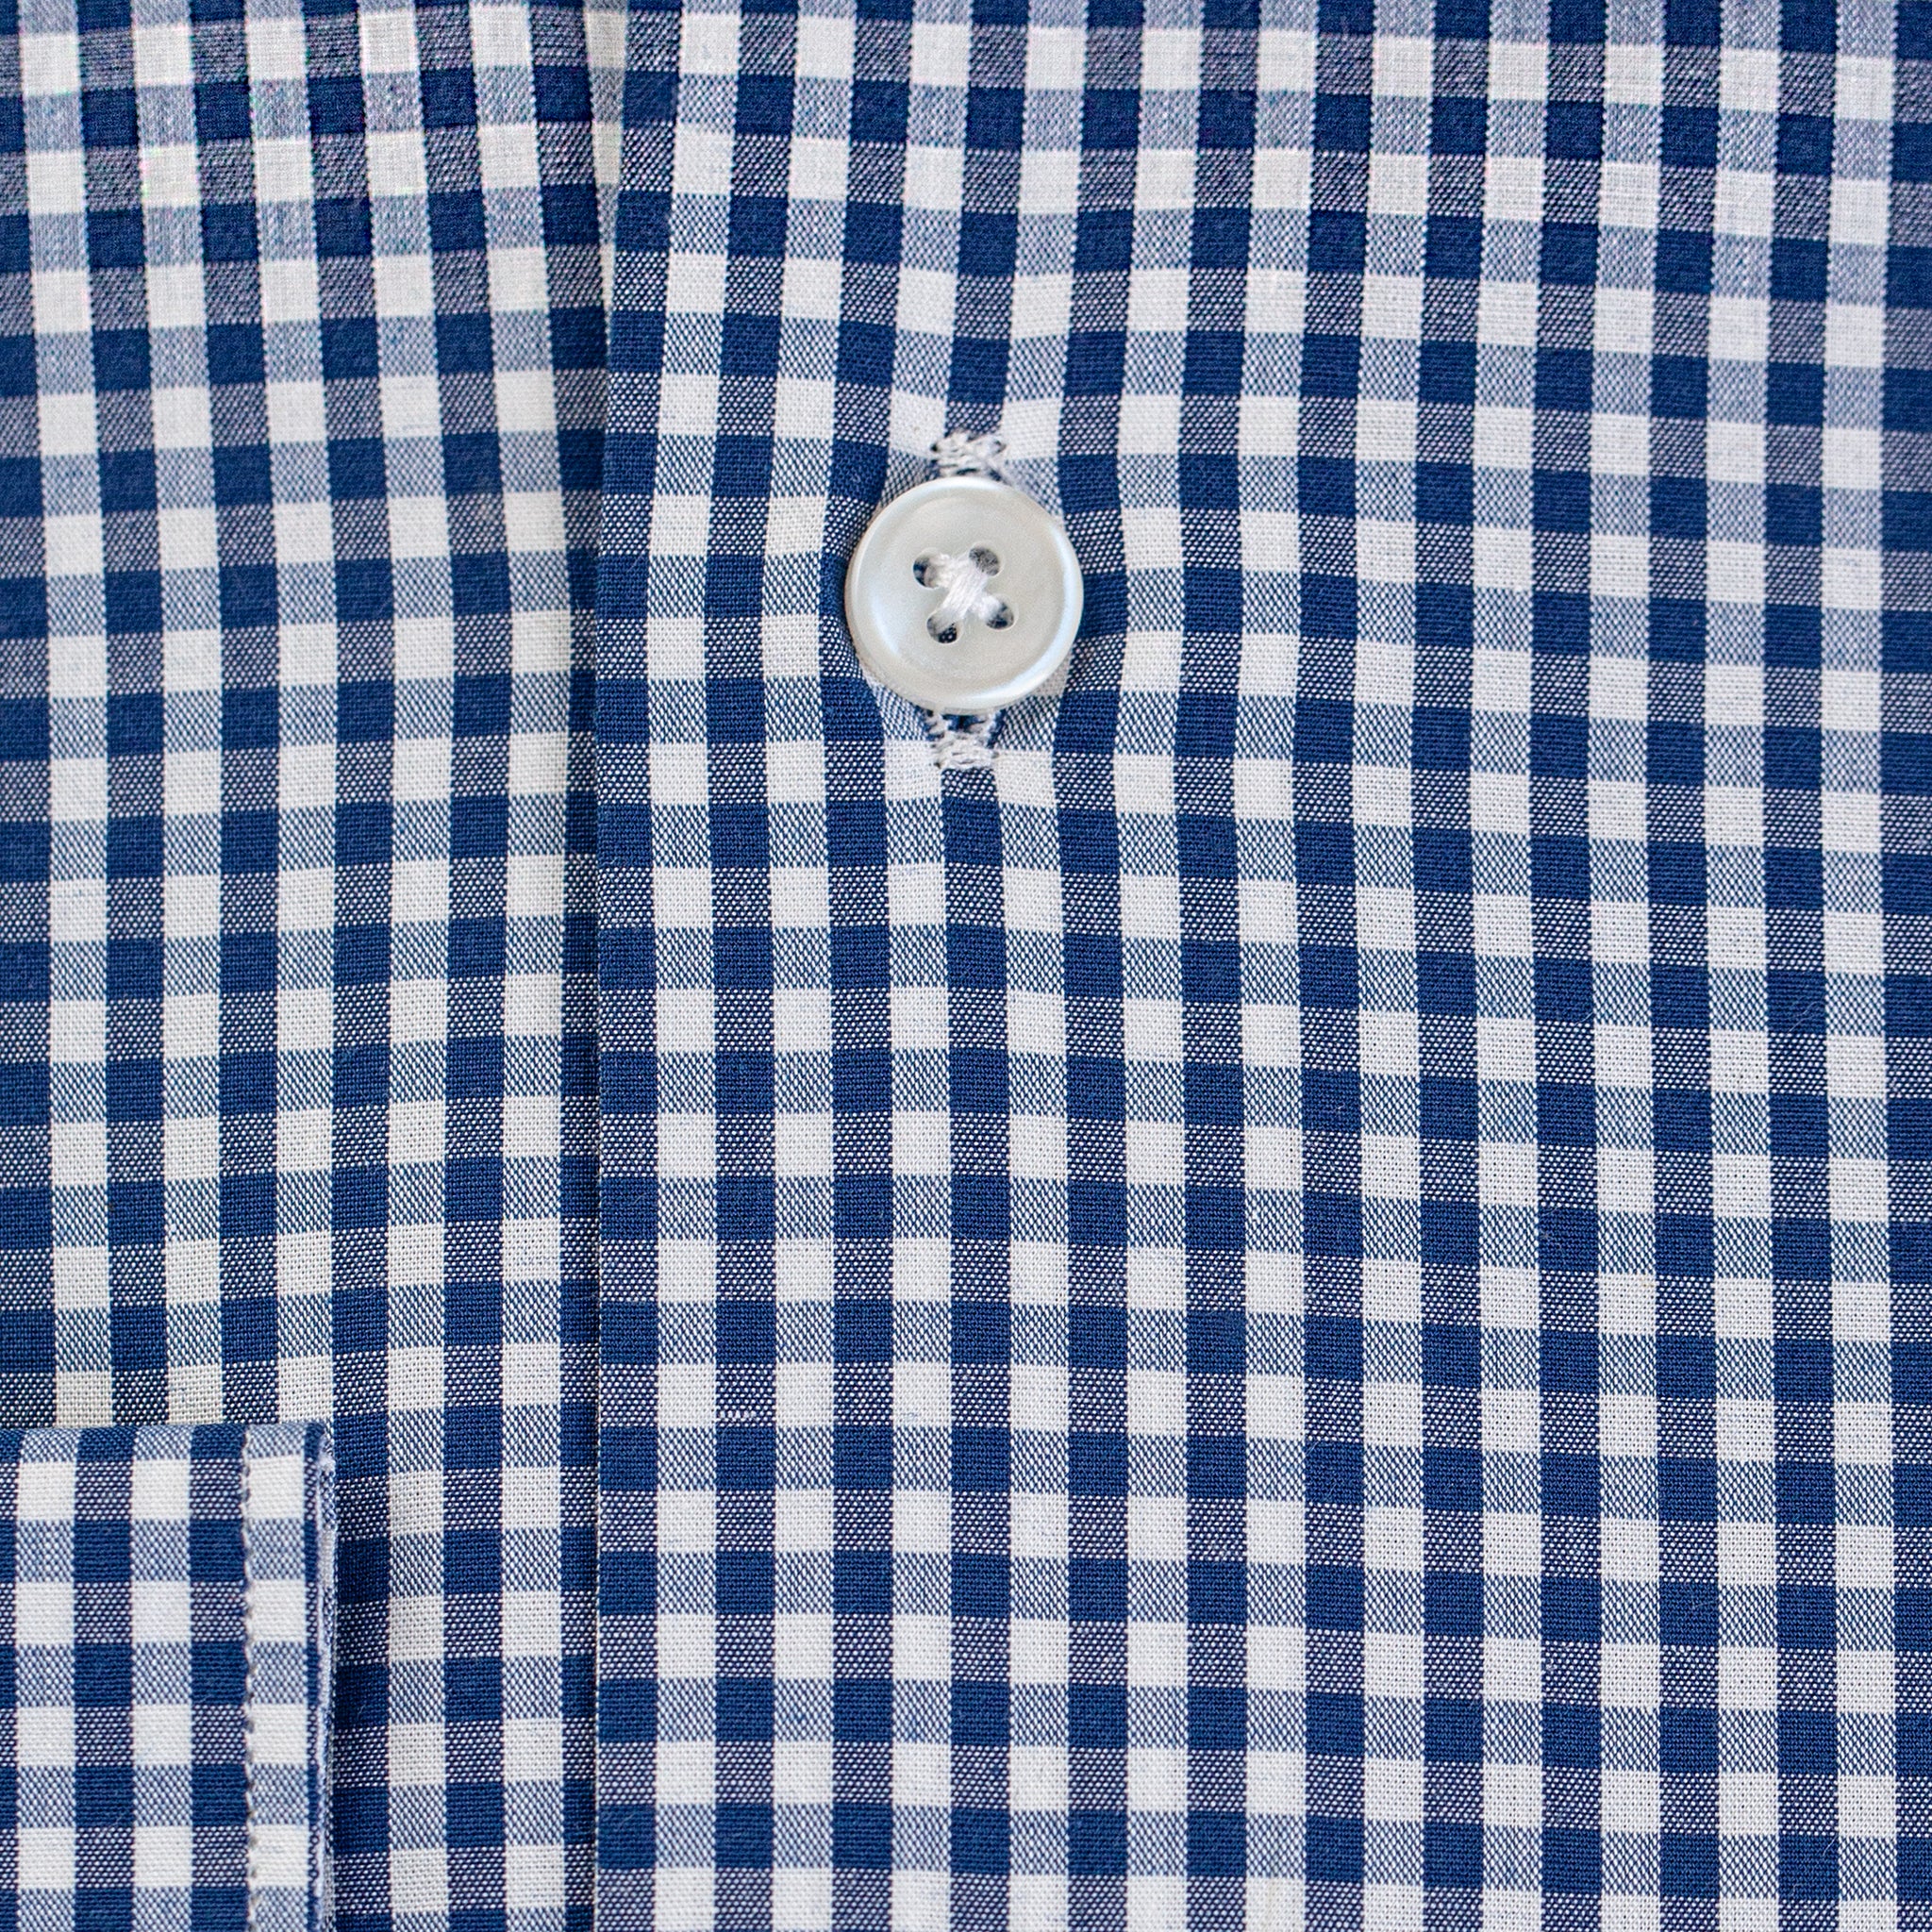 Formal Checked Cotton Shirt